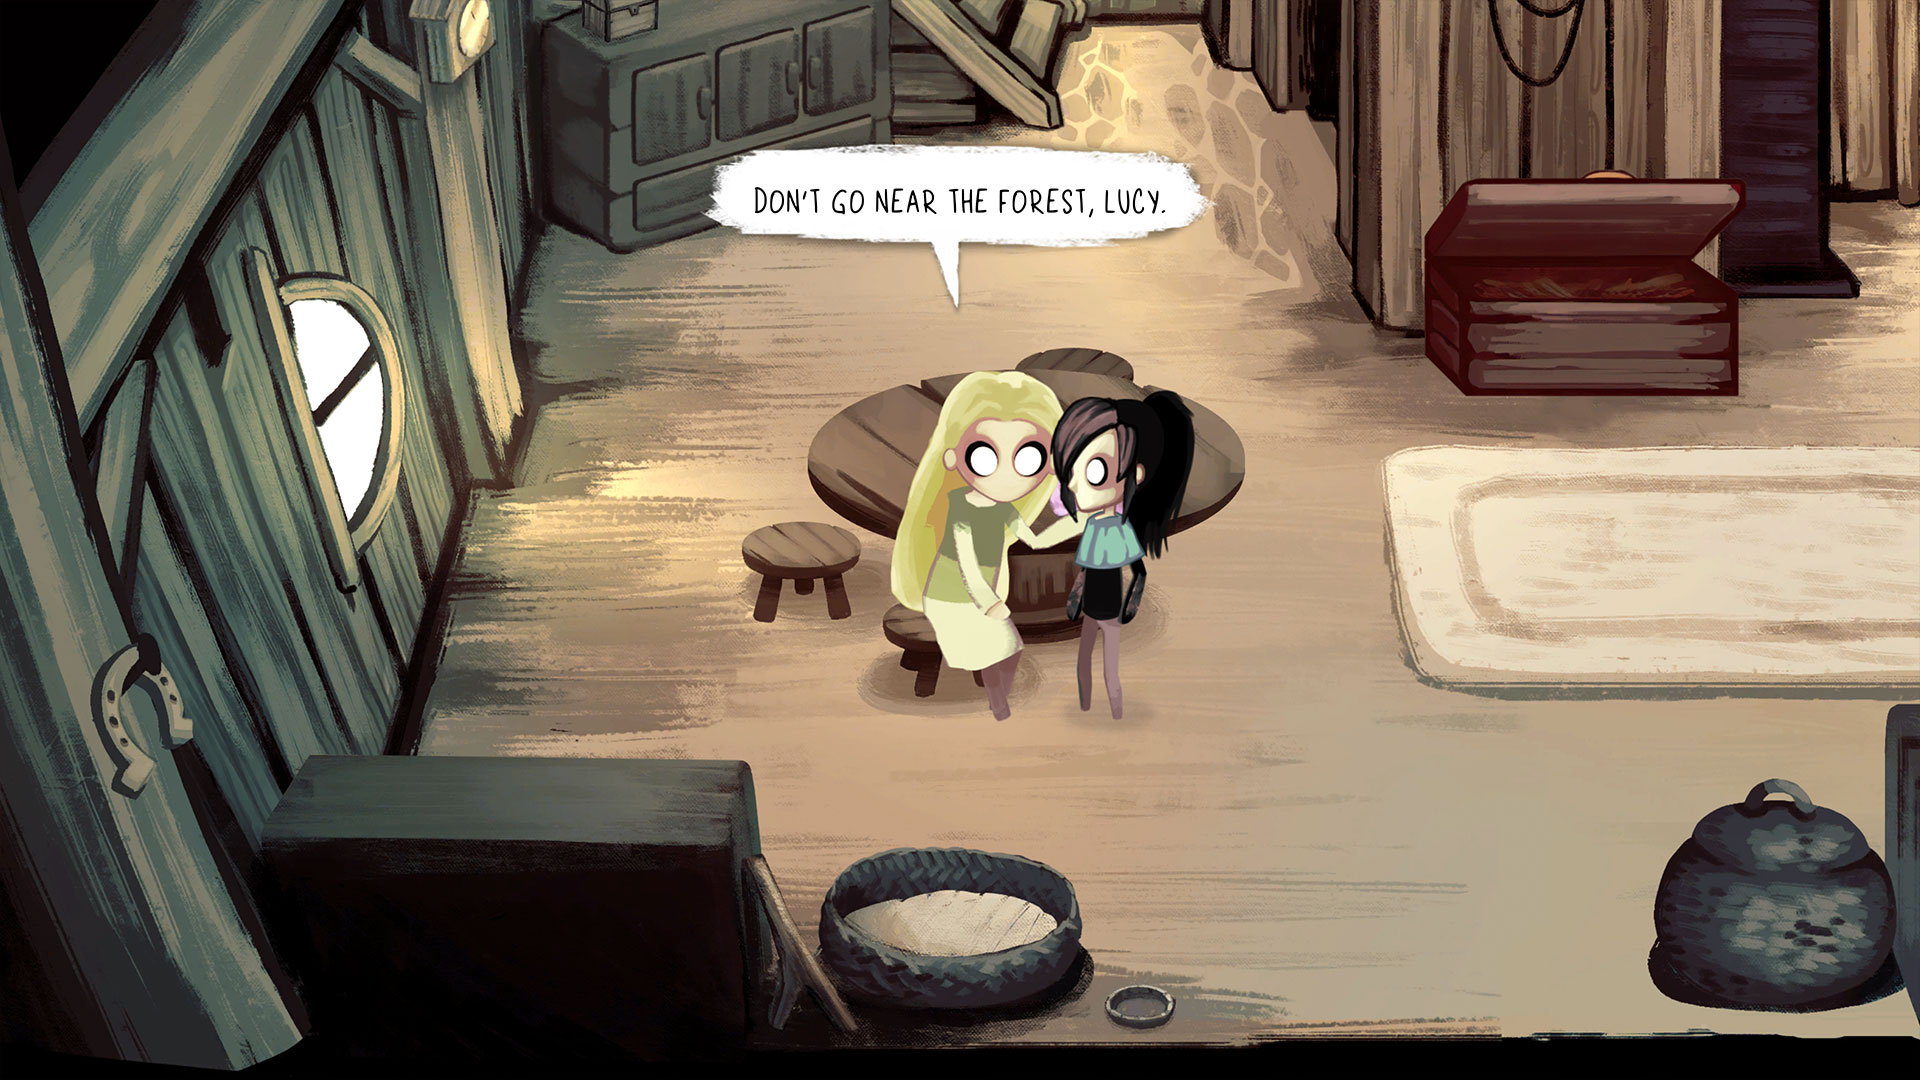 Children of Silentown is a cute but spooky point and click game inspired by Tim Burton